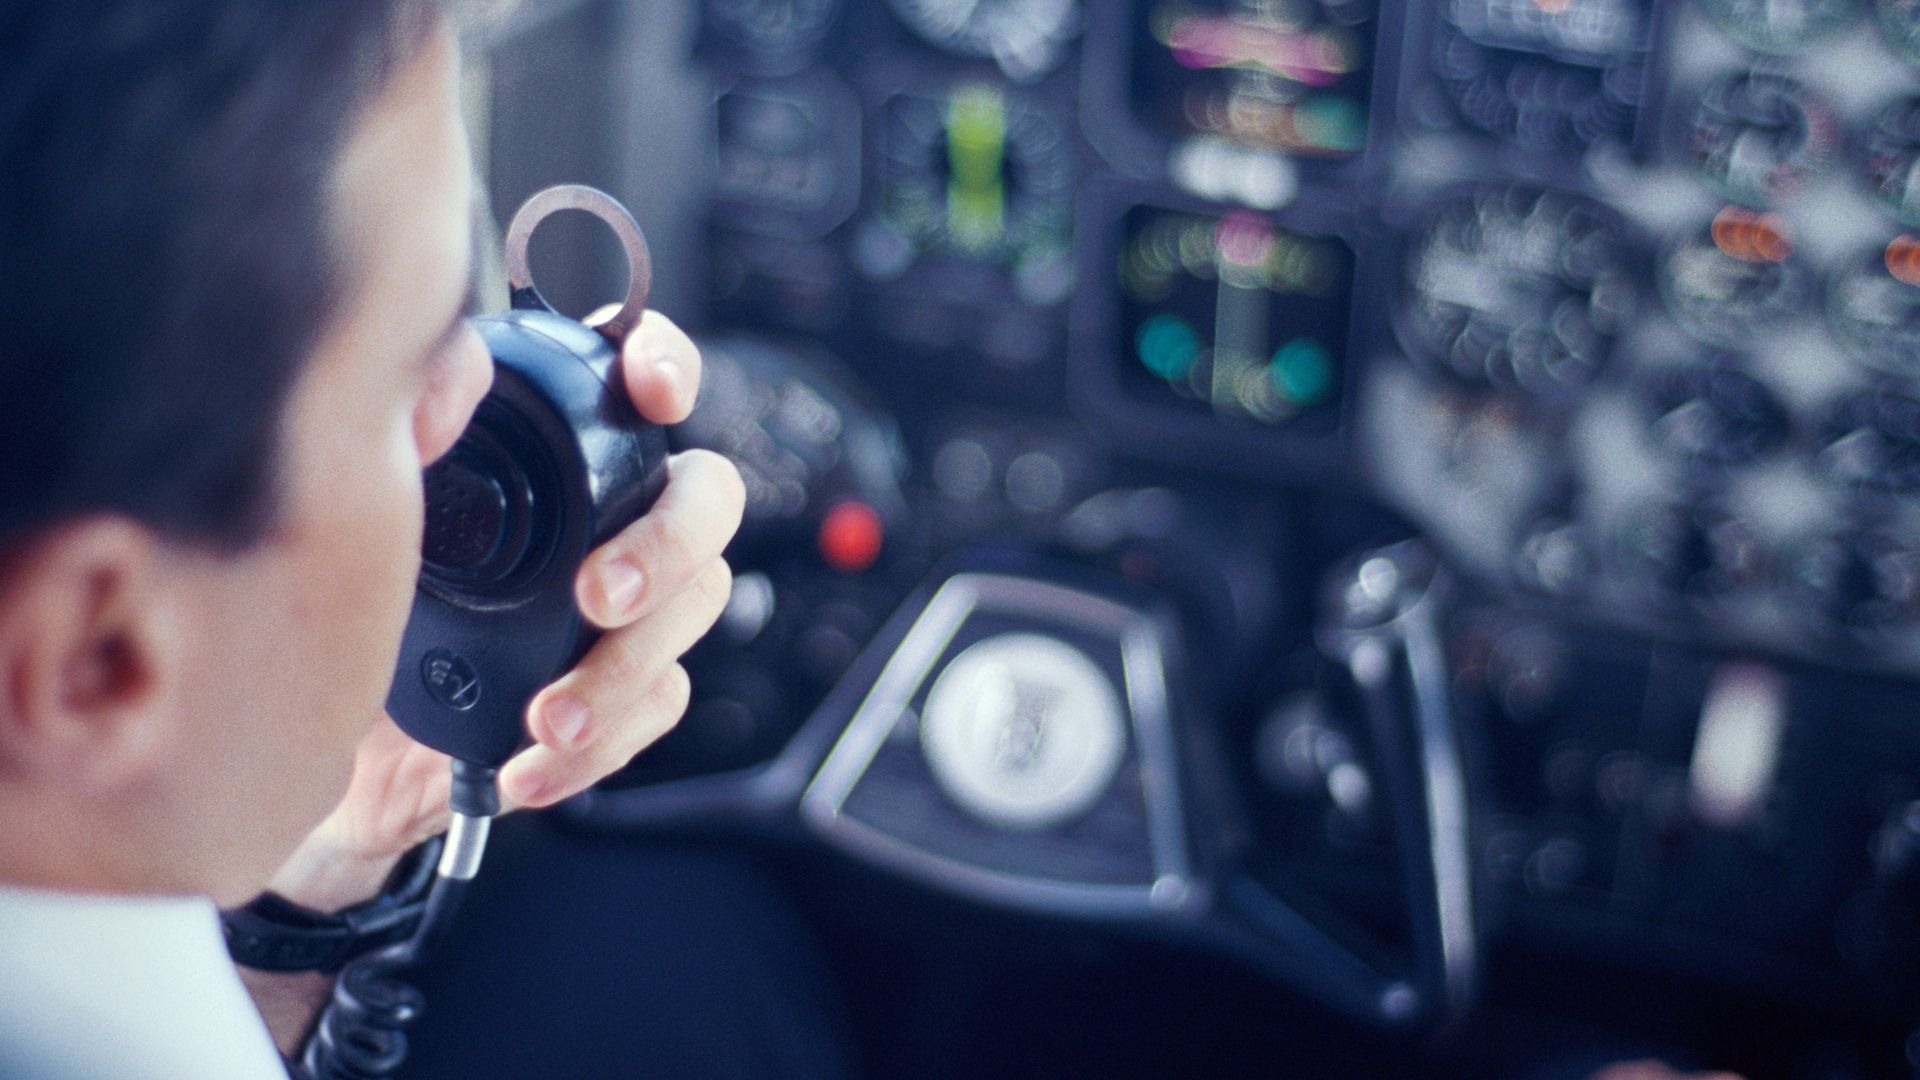 The FAA is investigating pilots who are suspected of falsifying their mental health records. The roughly 4,800 pilots are military veterans.